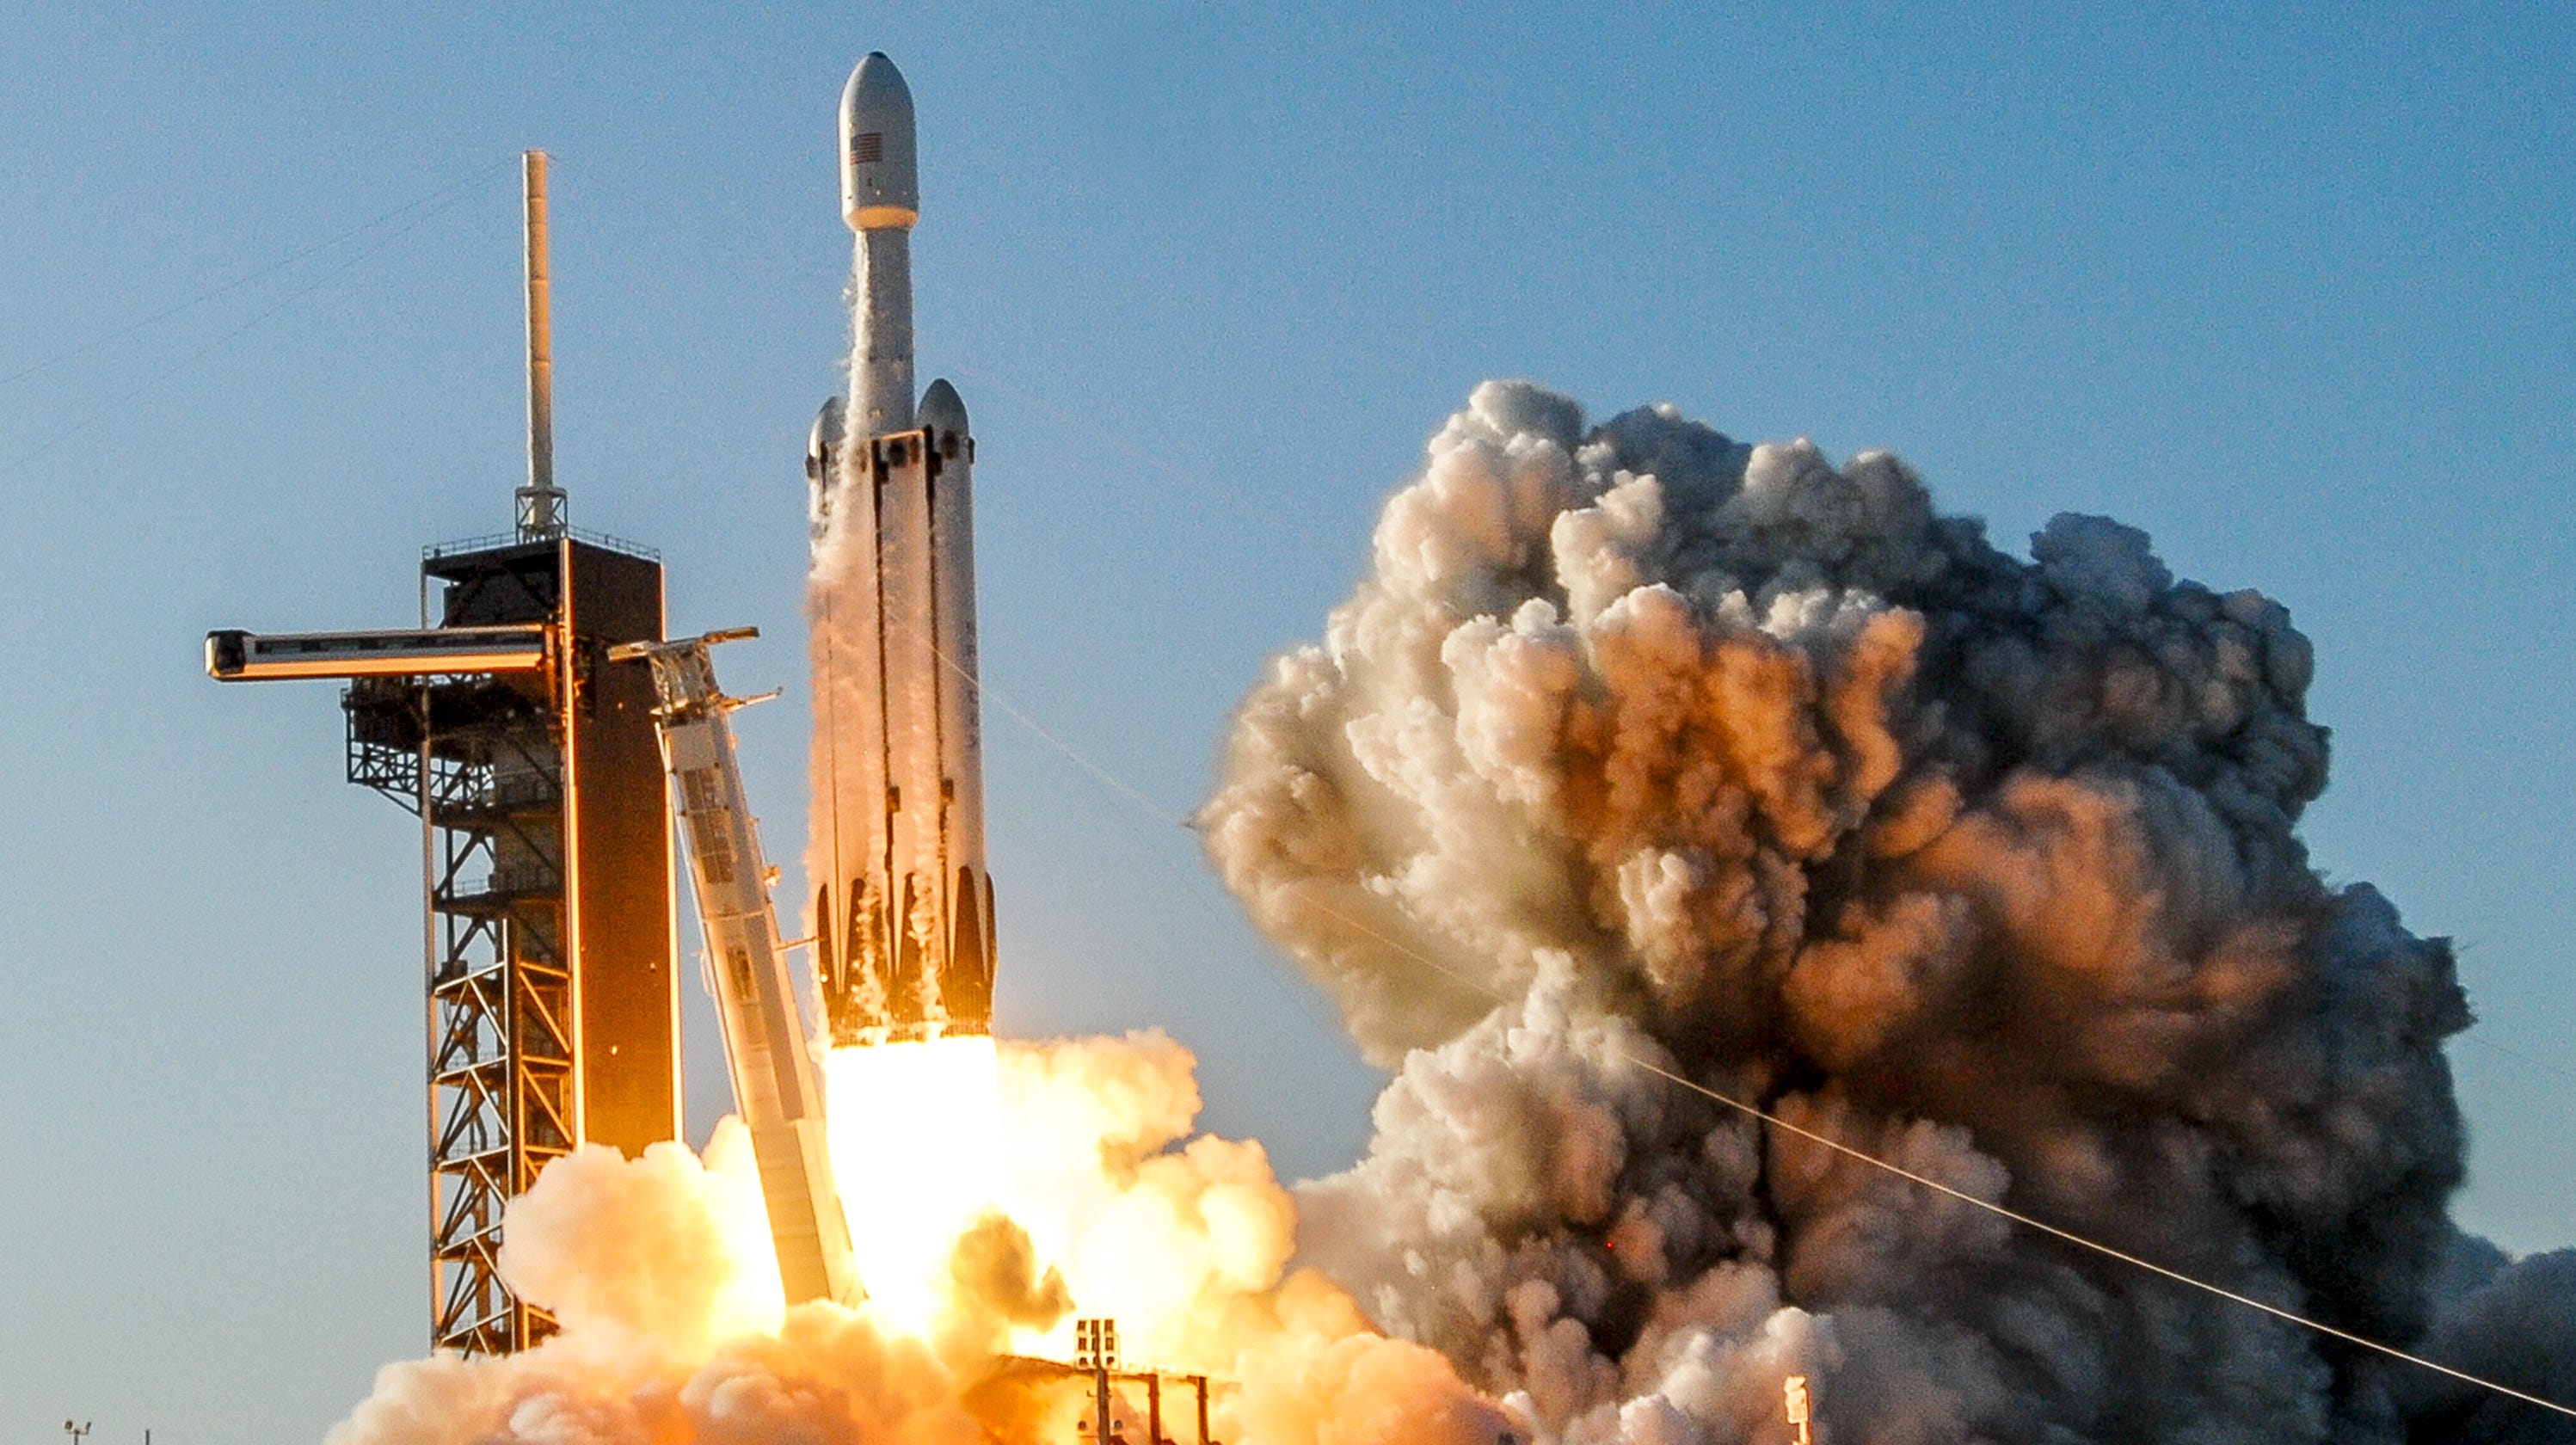 spacex-falcon-heavy-rocket-set-to-launch-nasa-payloads-from-kennedy